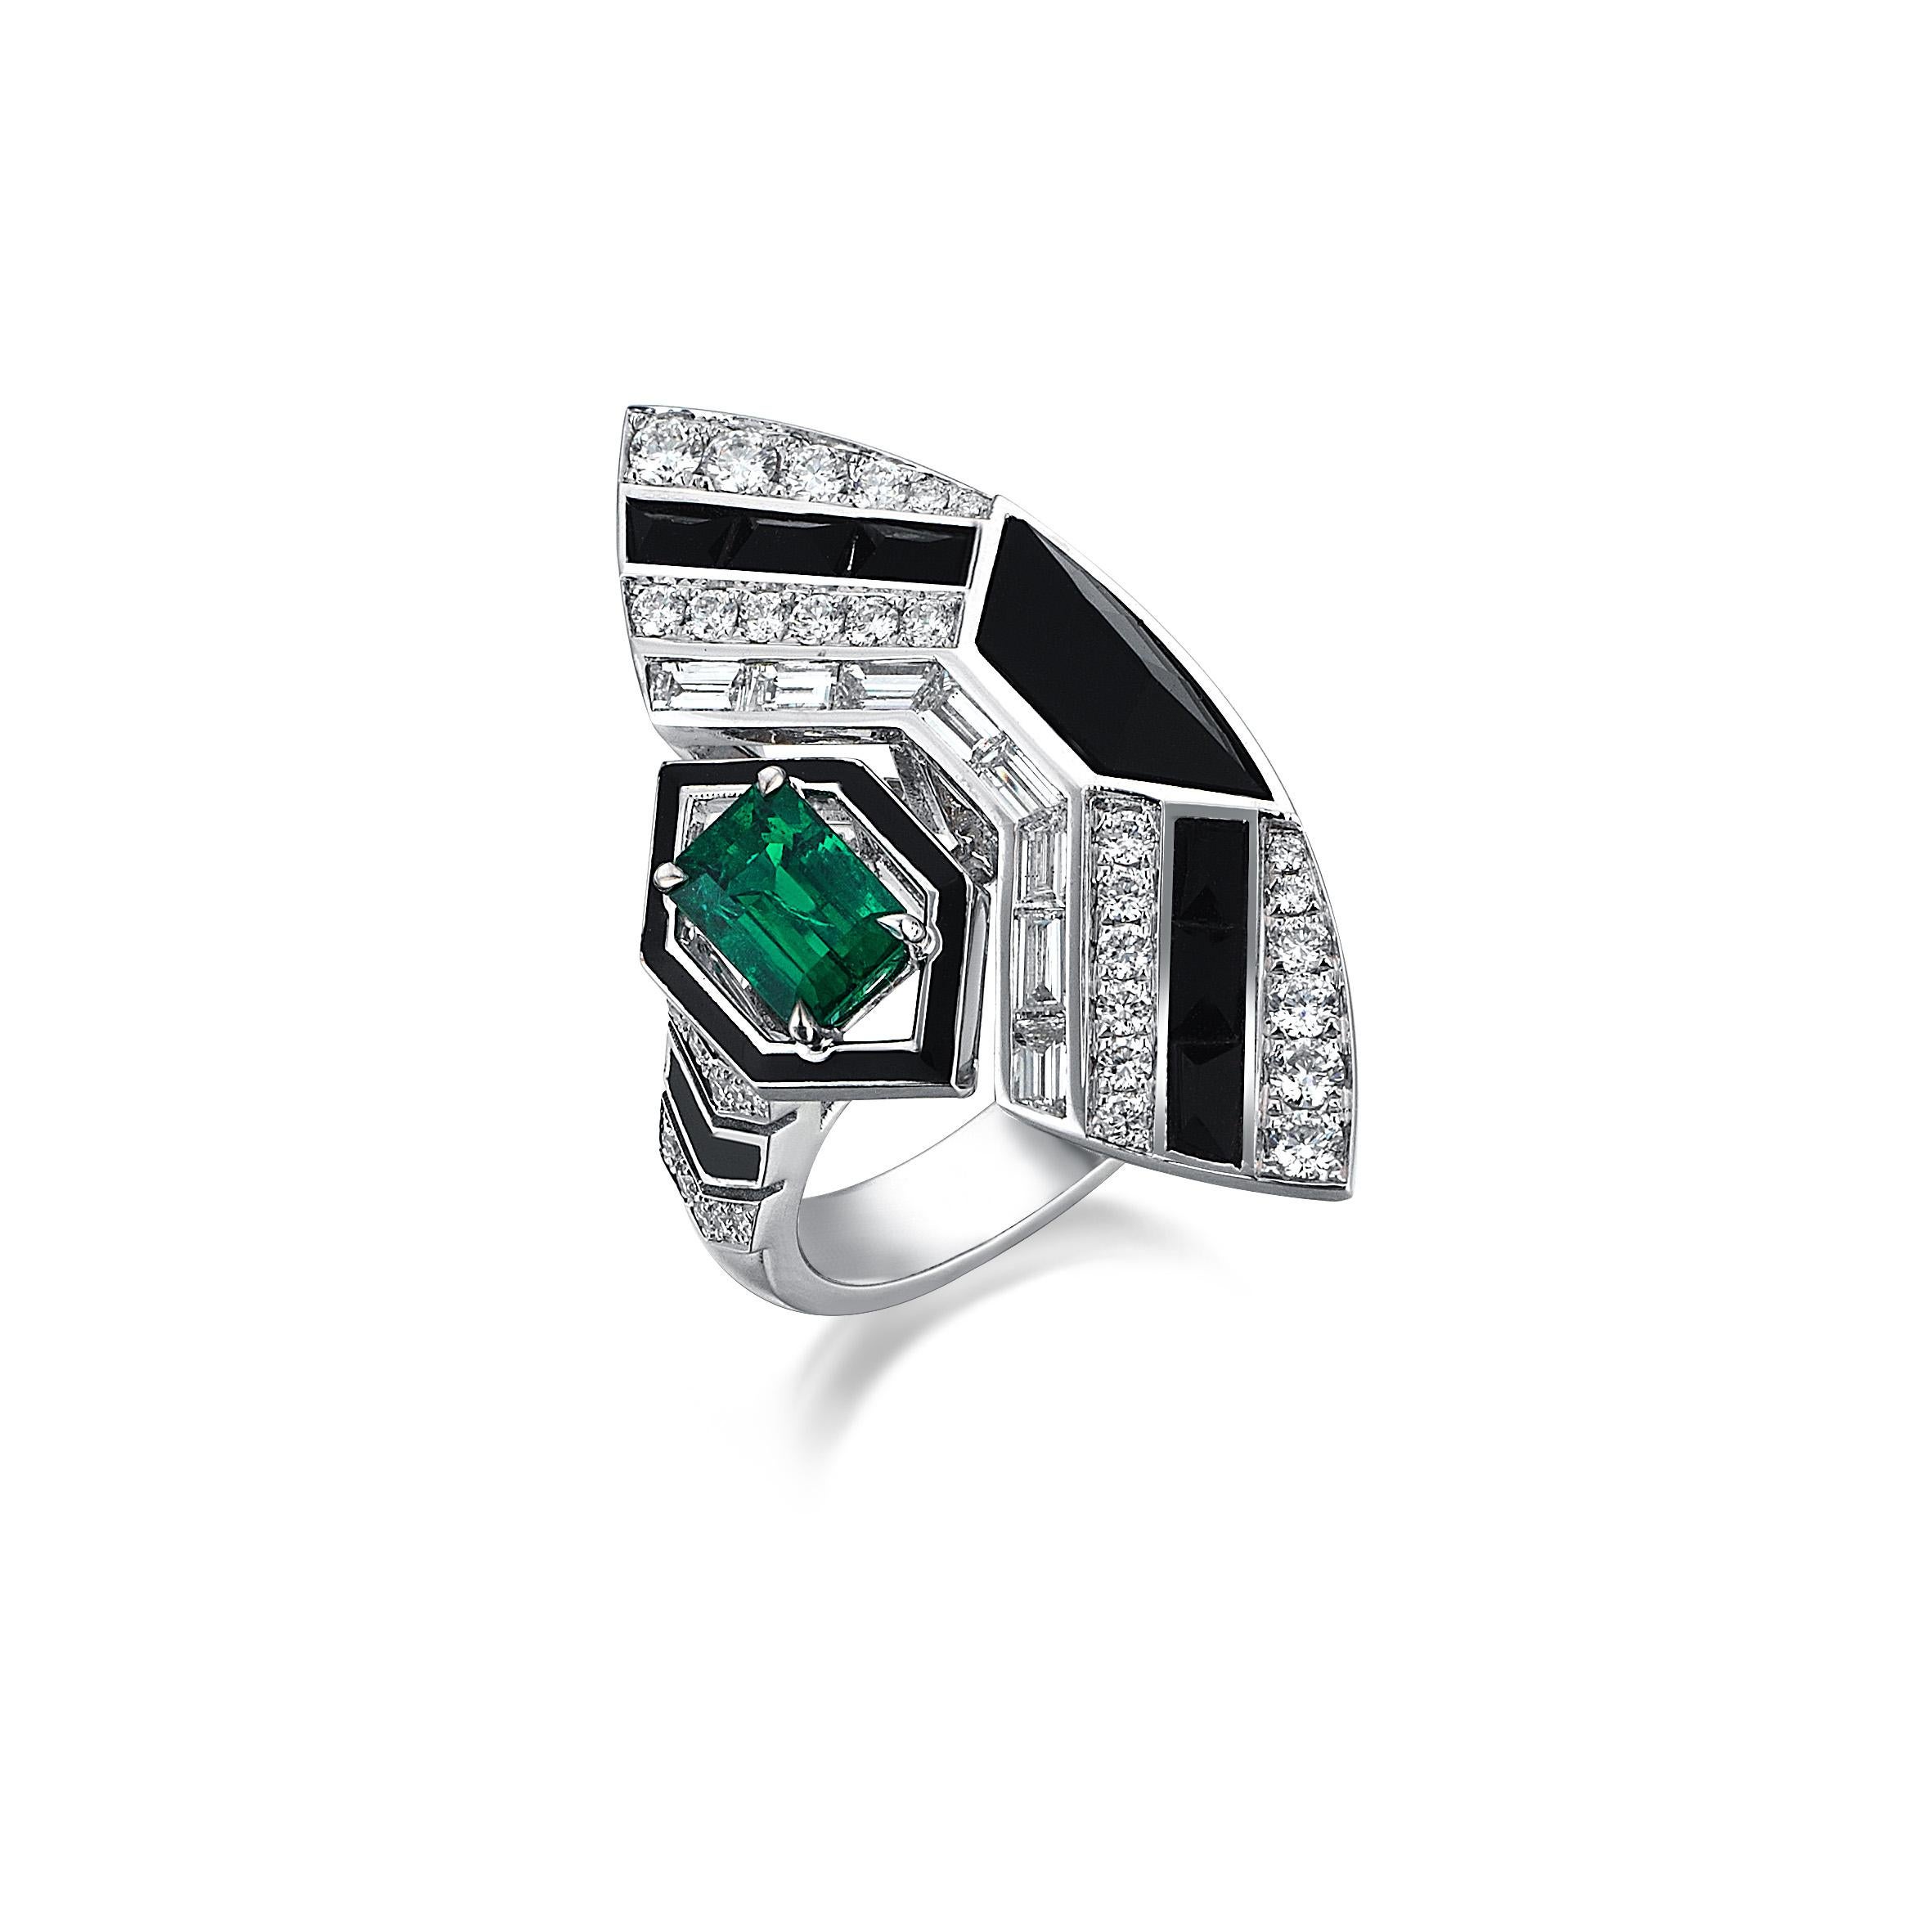 For Sale:  2.06 Carat Art Deco Diamond and Emerald 18K White Gold Ring 5